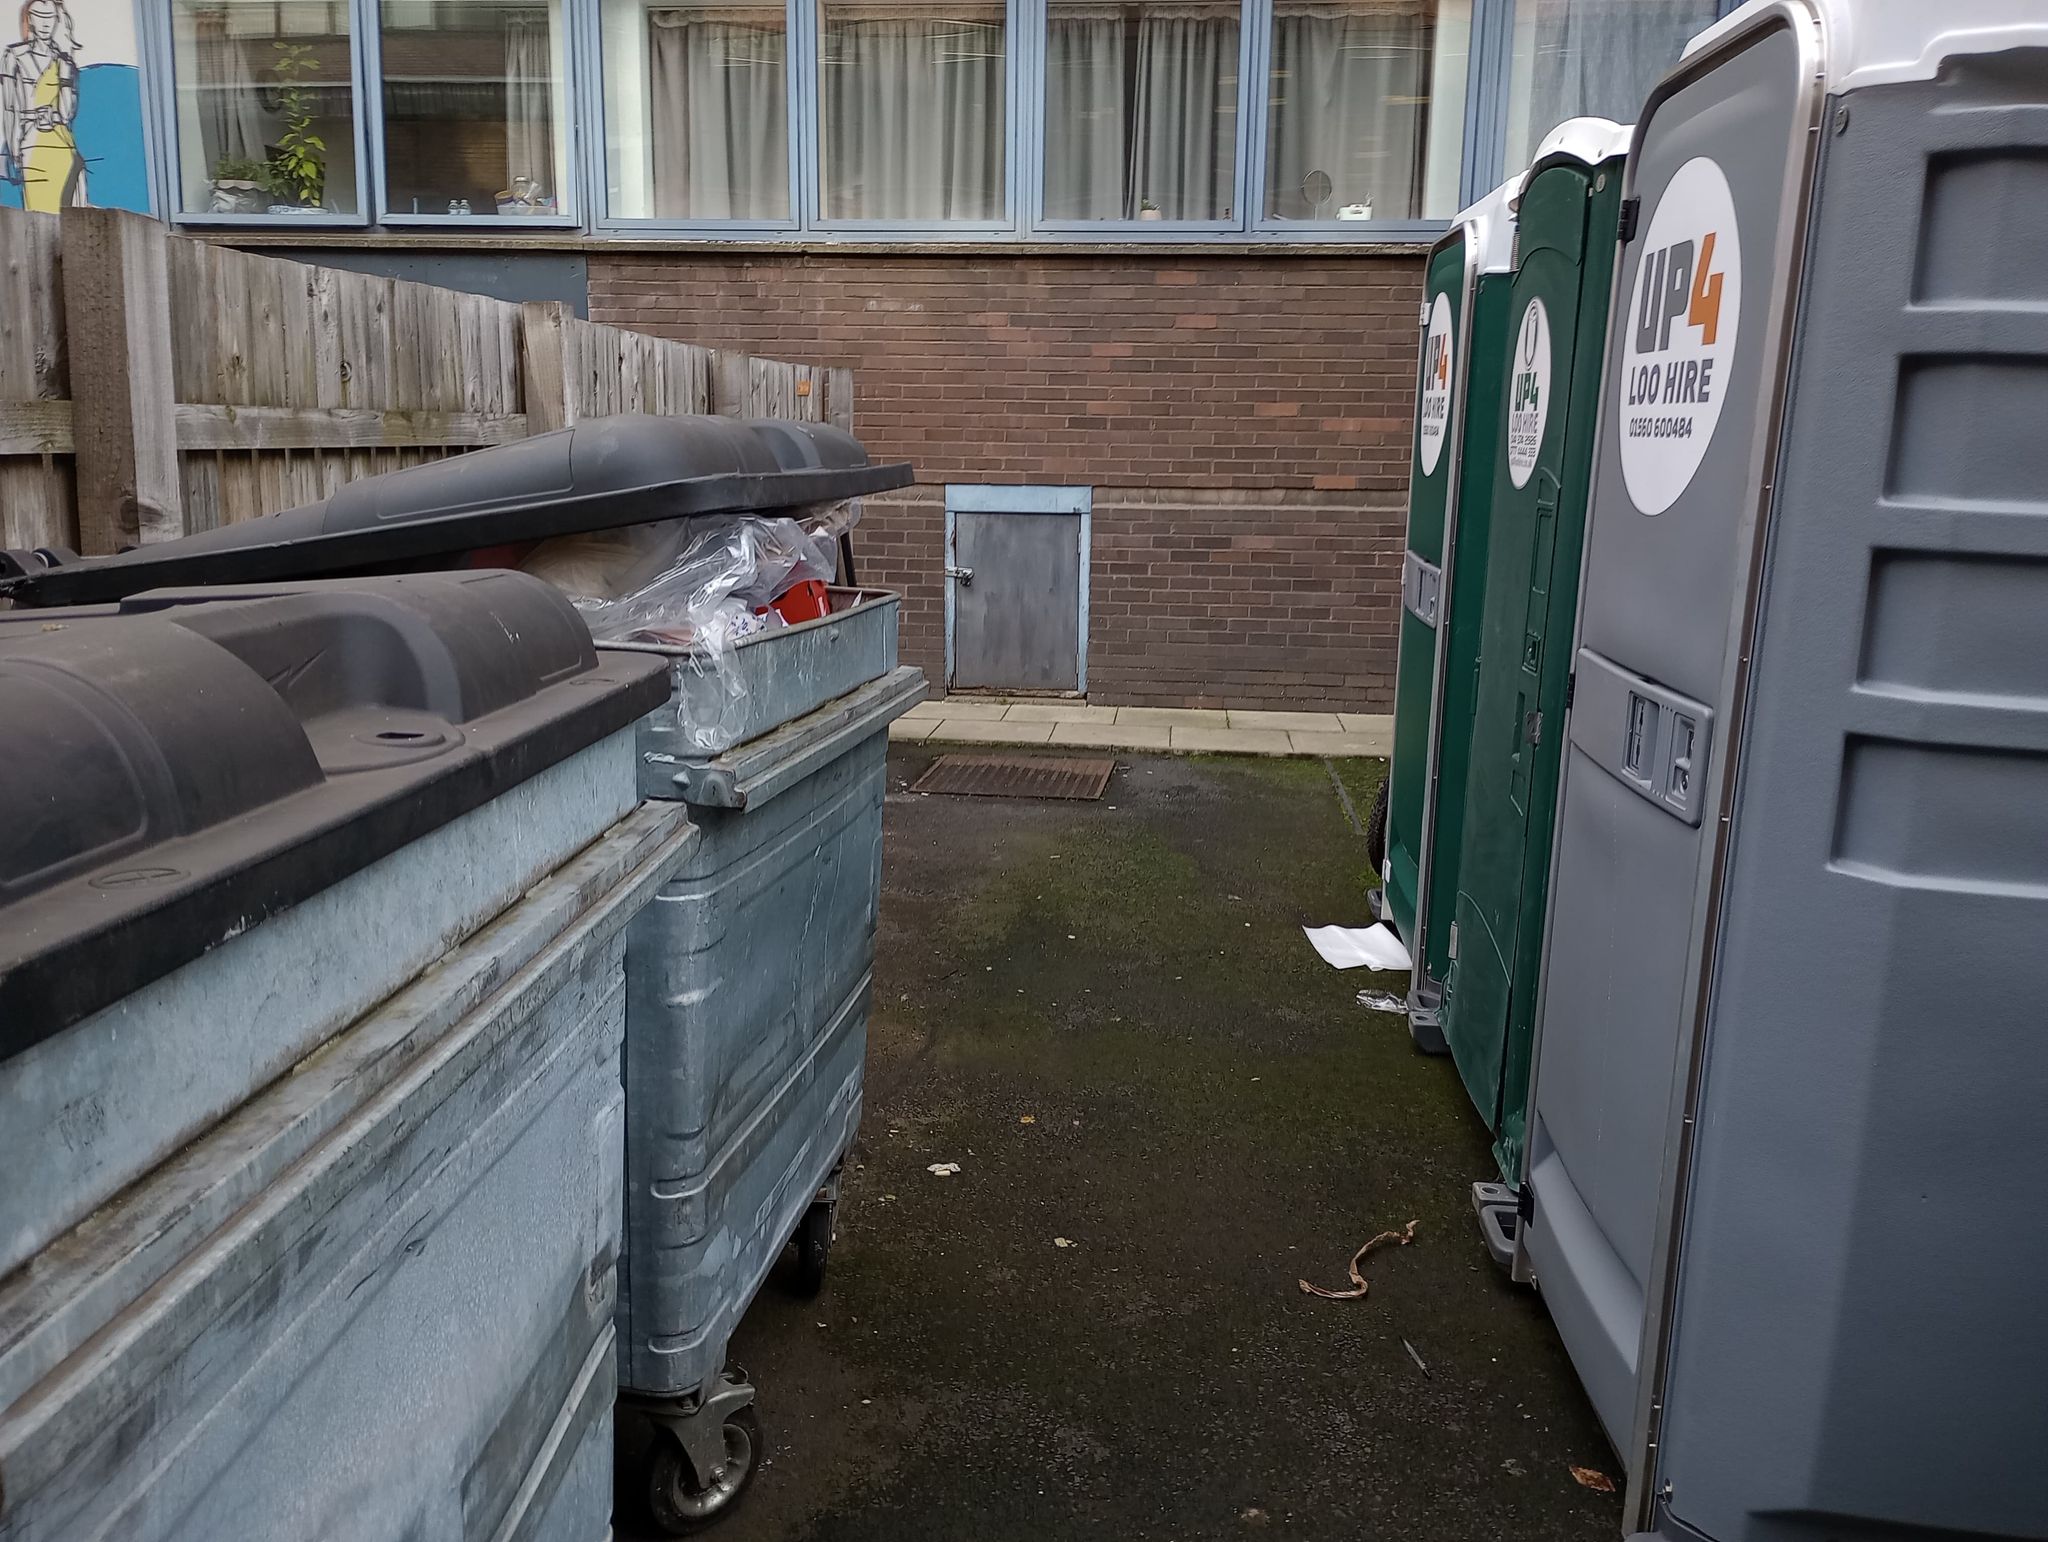 Portable toilets were erected near bins for tenants to use. 